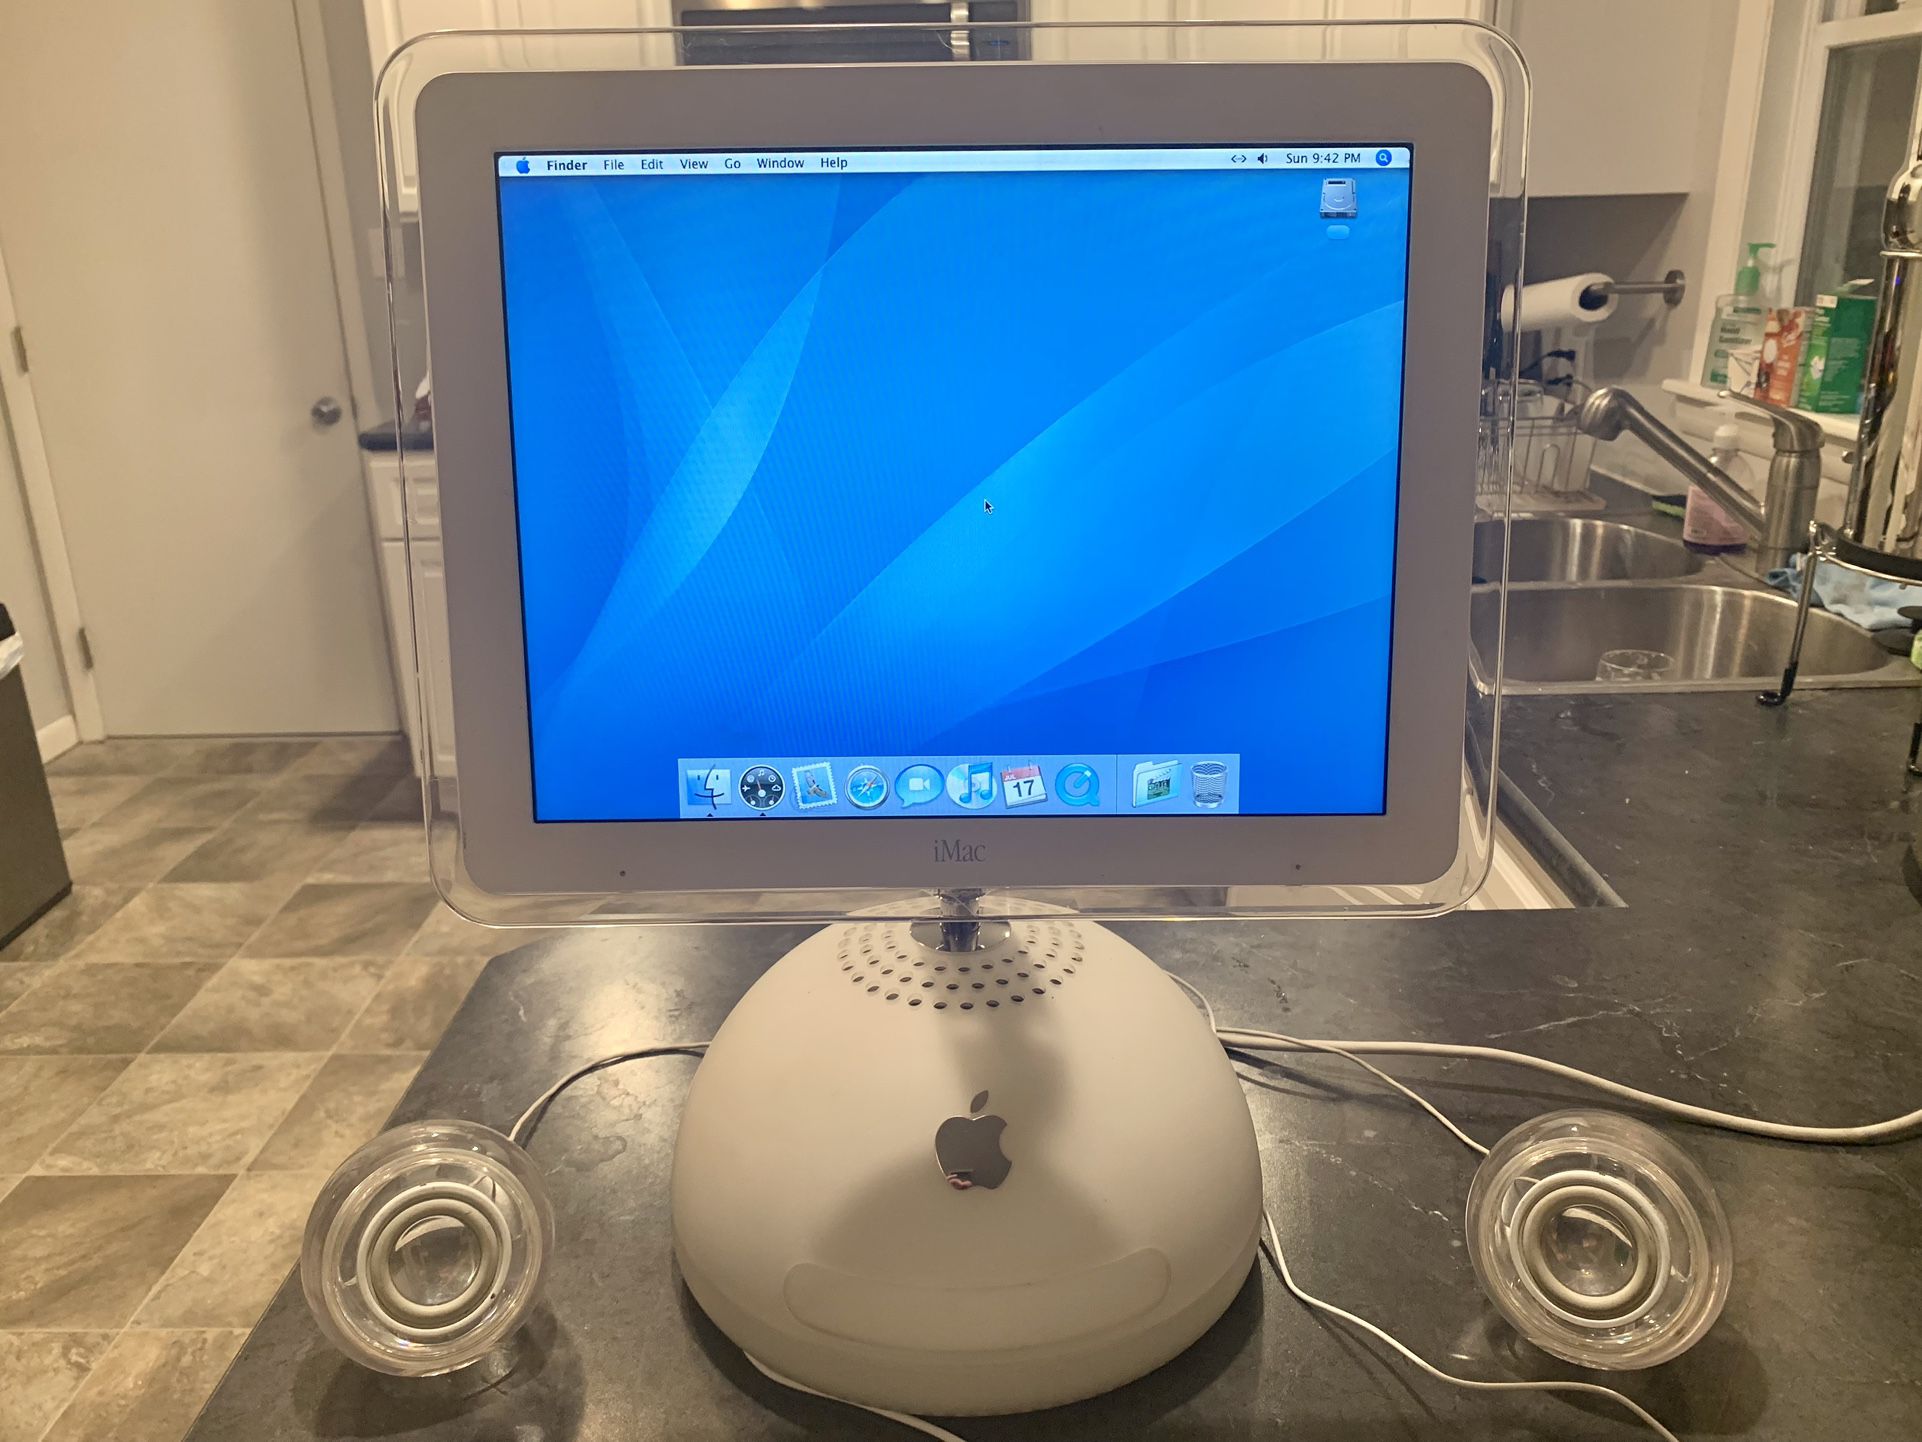 Vintage, Working iMac G4 15” Screen With Speakers